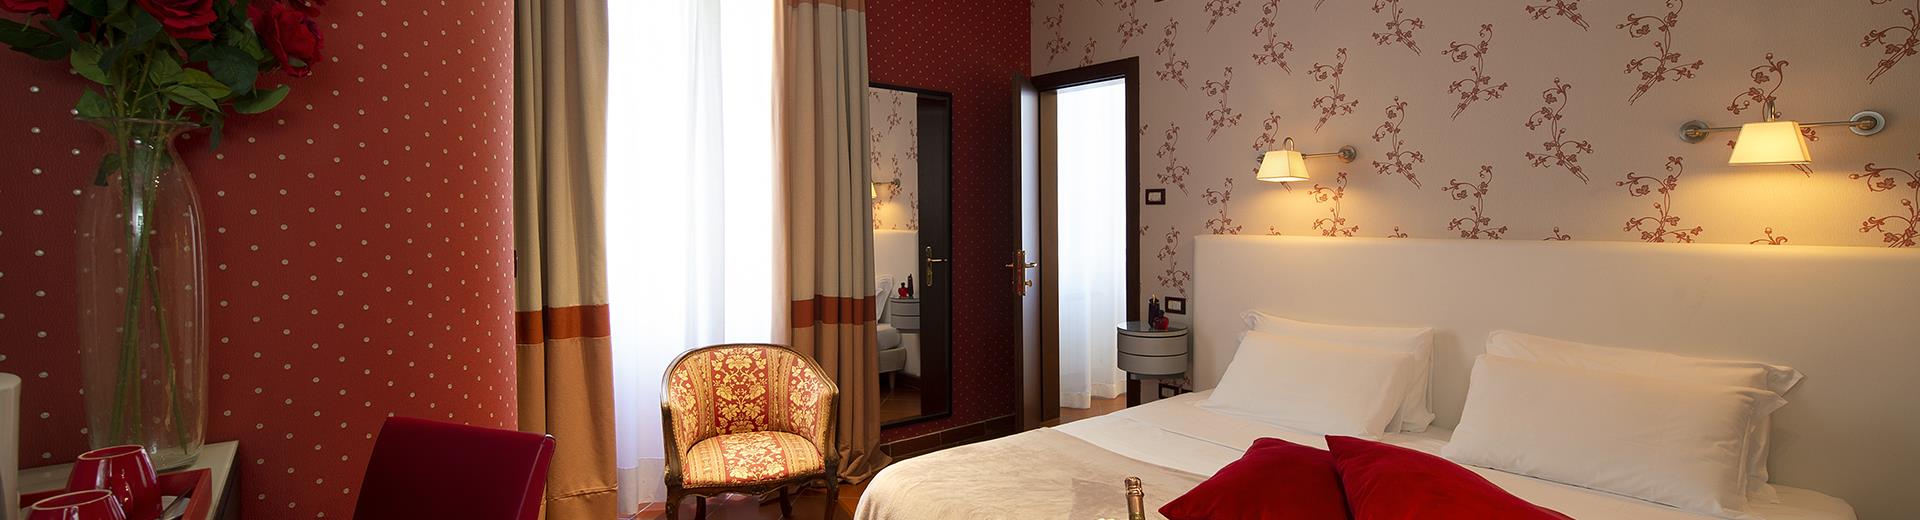 Discover the beauty of staying in the Centre of Florence: choose Sure Hotel Collection De La Pace and enjoy the comfort of its rooms and amenities at your disposal. Book now!